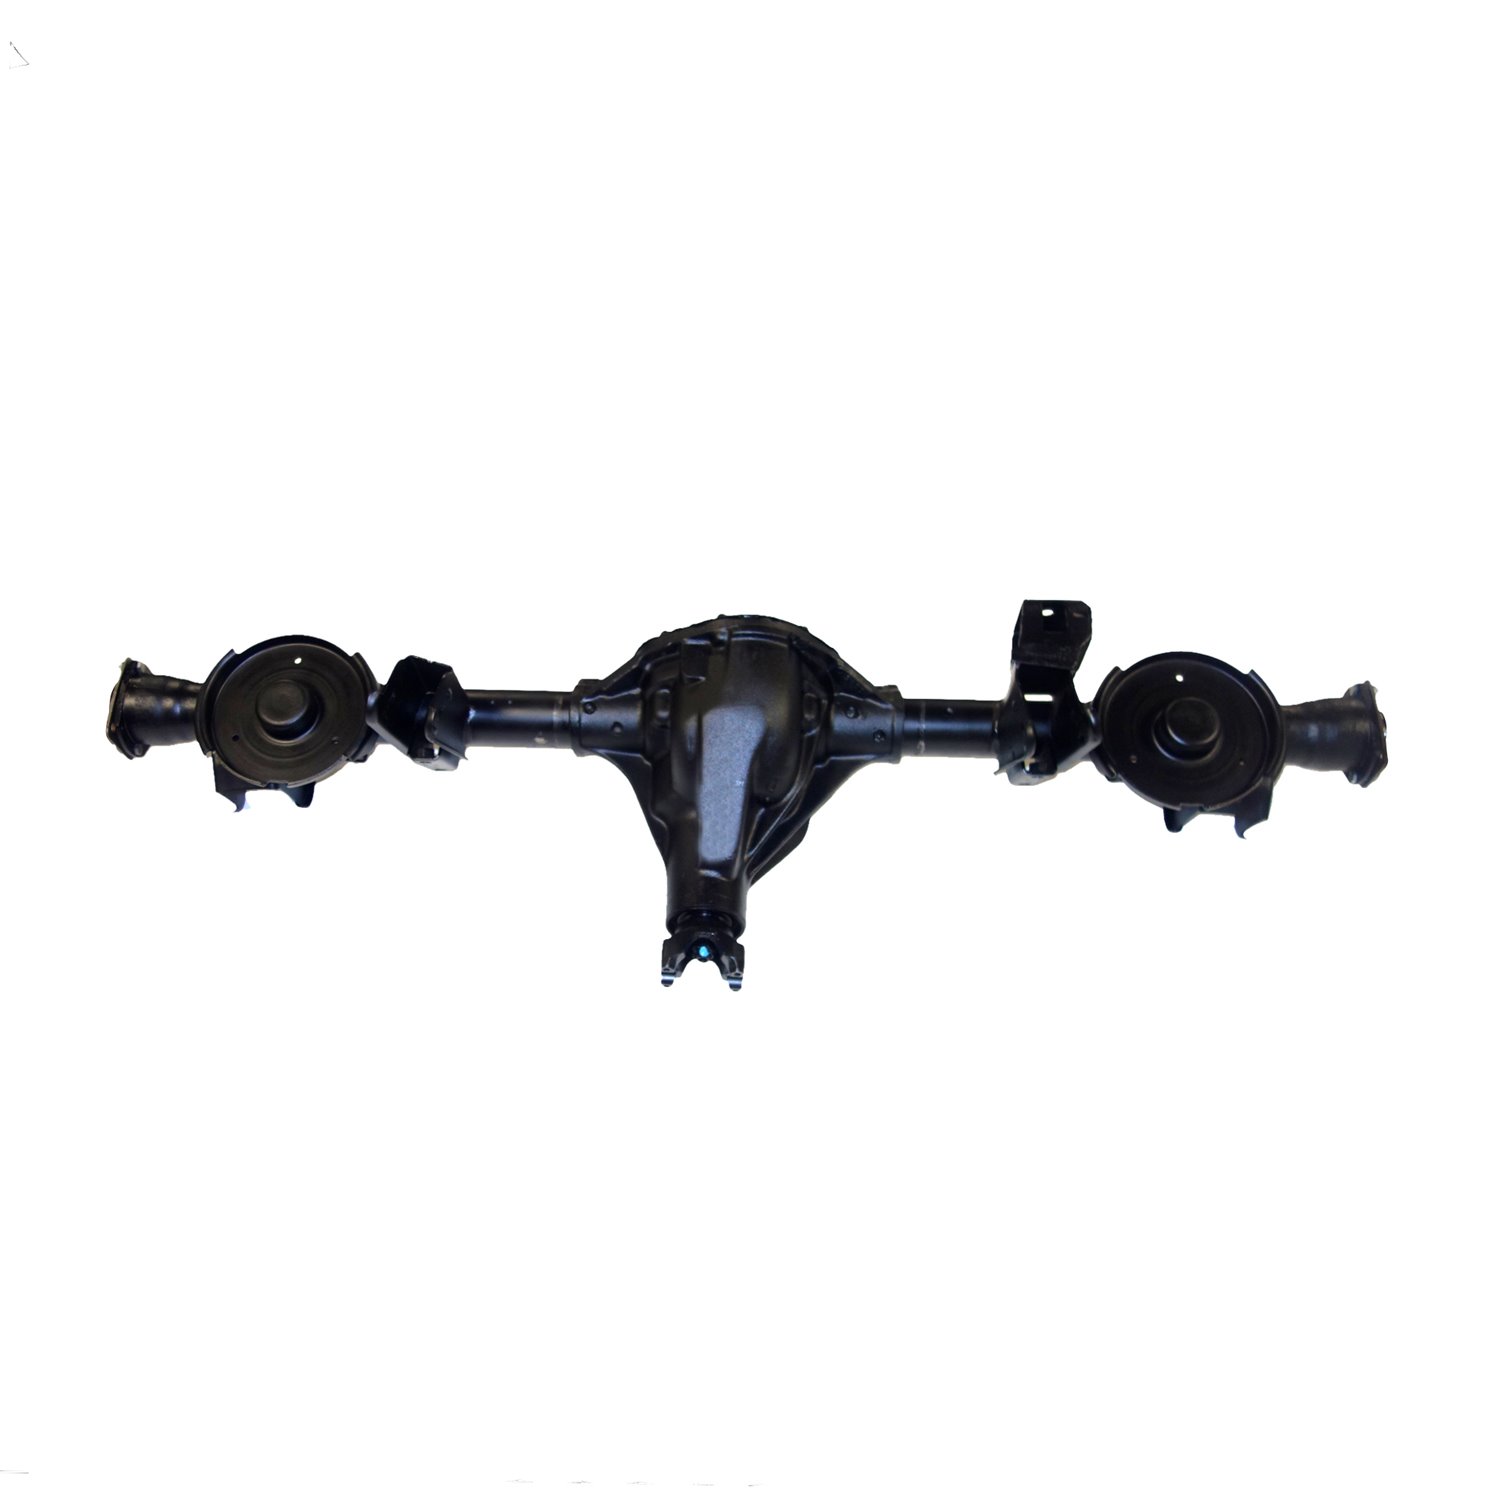 Remanufactured Axle Assy for Dana 44 06-10 Grand